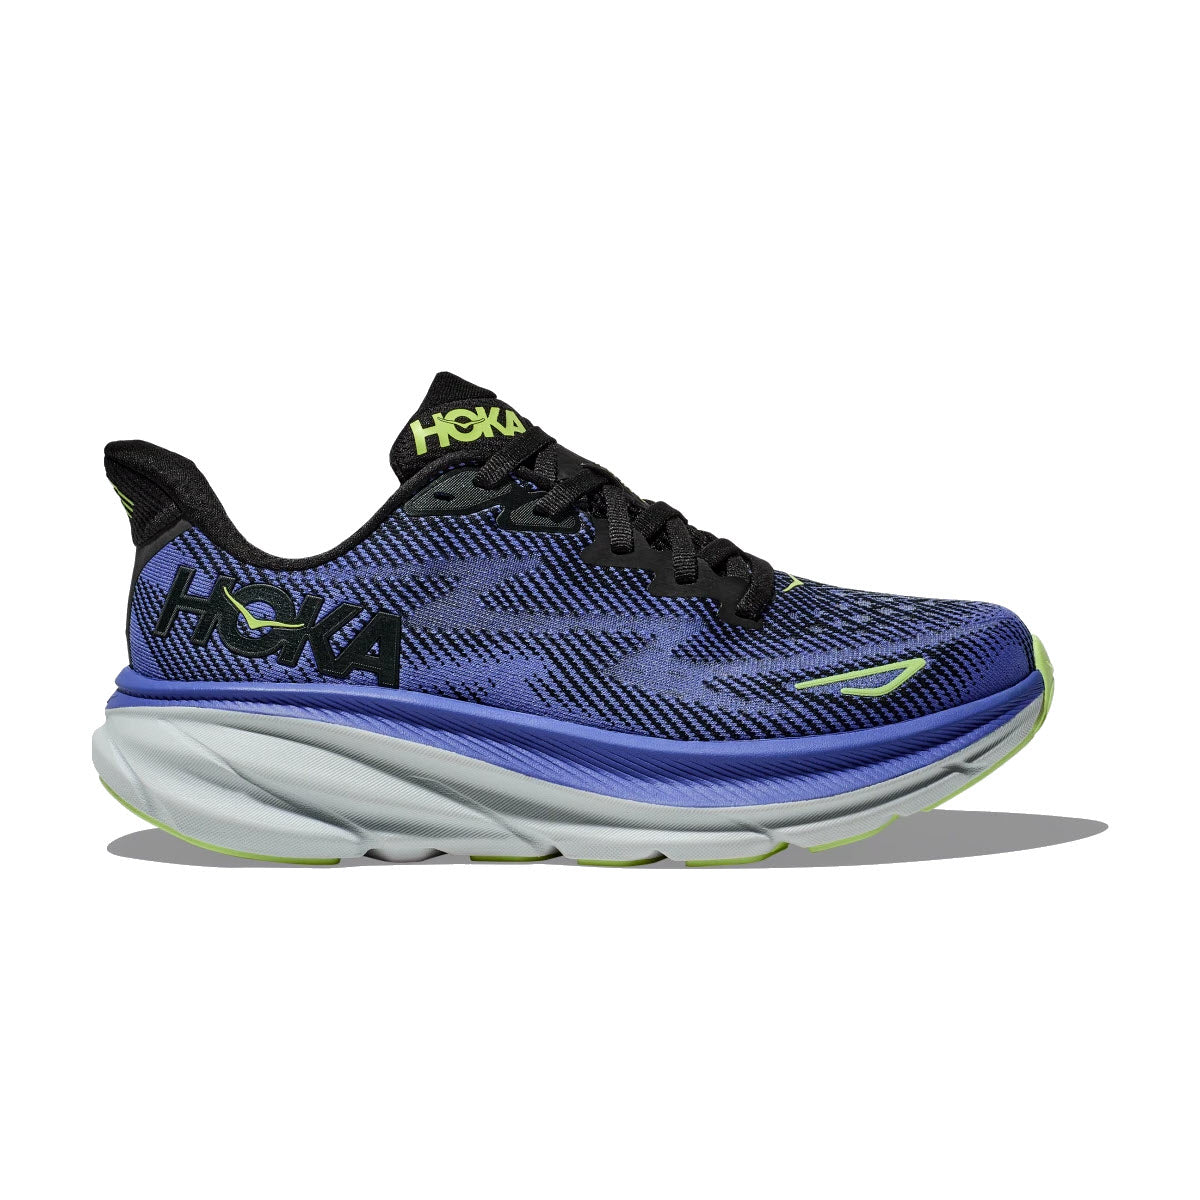 A Hoka CLIFTON 9 BLACK/STELLAR BLUE - WOMENS running shoe, featuring a black and blue patterned upper and a thick, white sole with an improved outsole design.